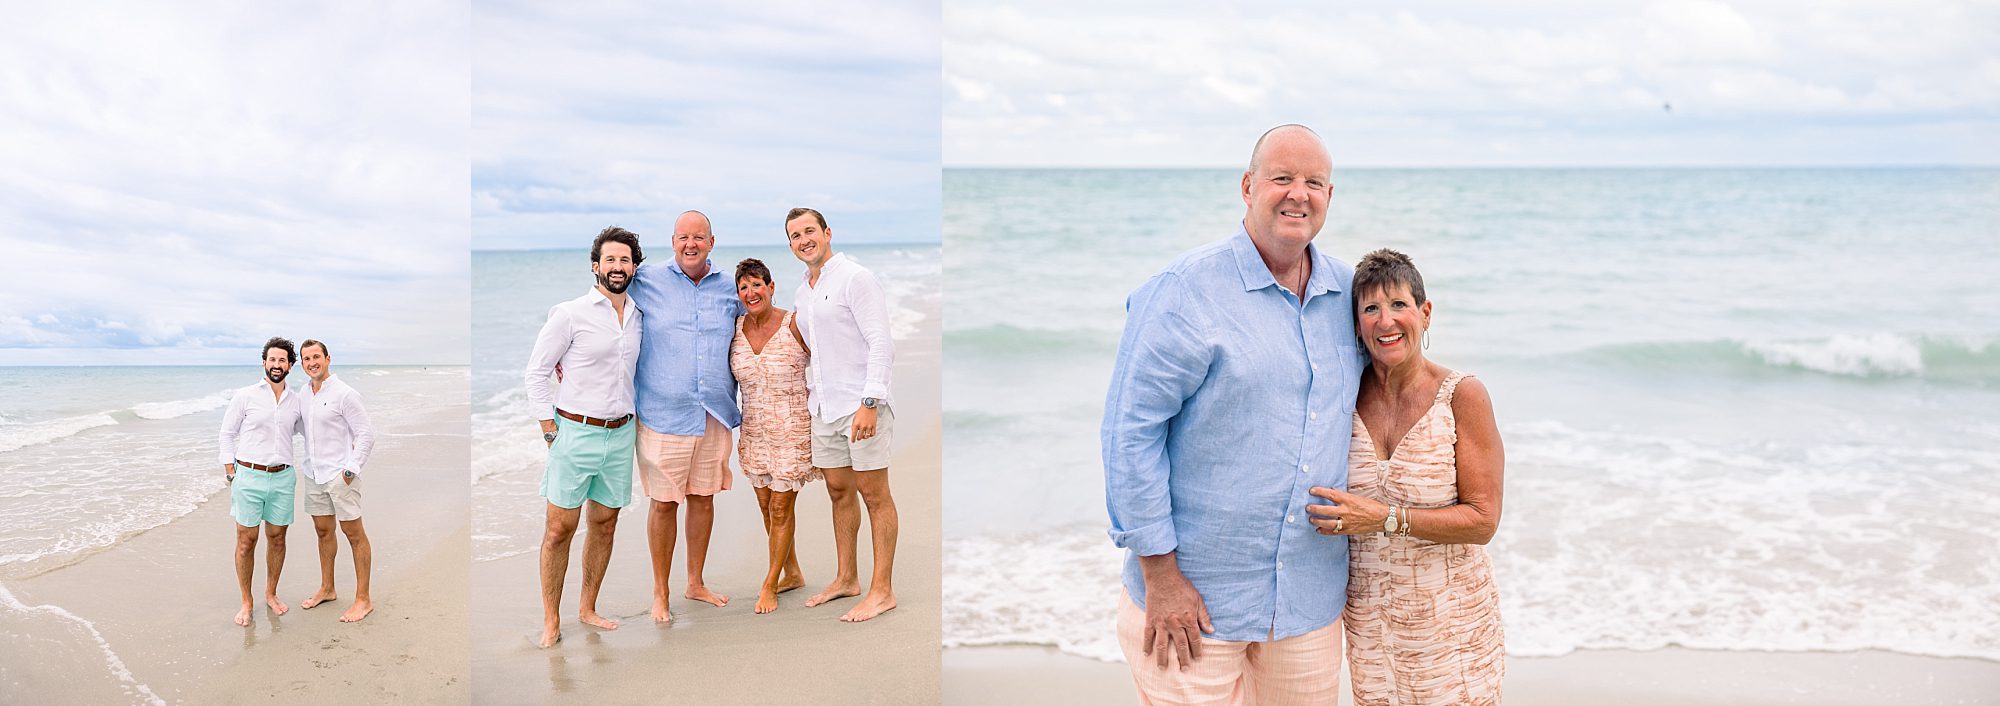 extended family photoshoot in Fort Lauderdale